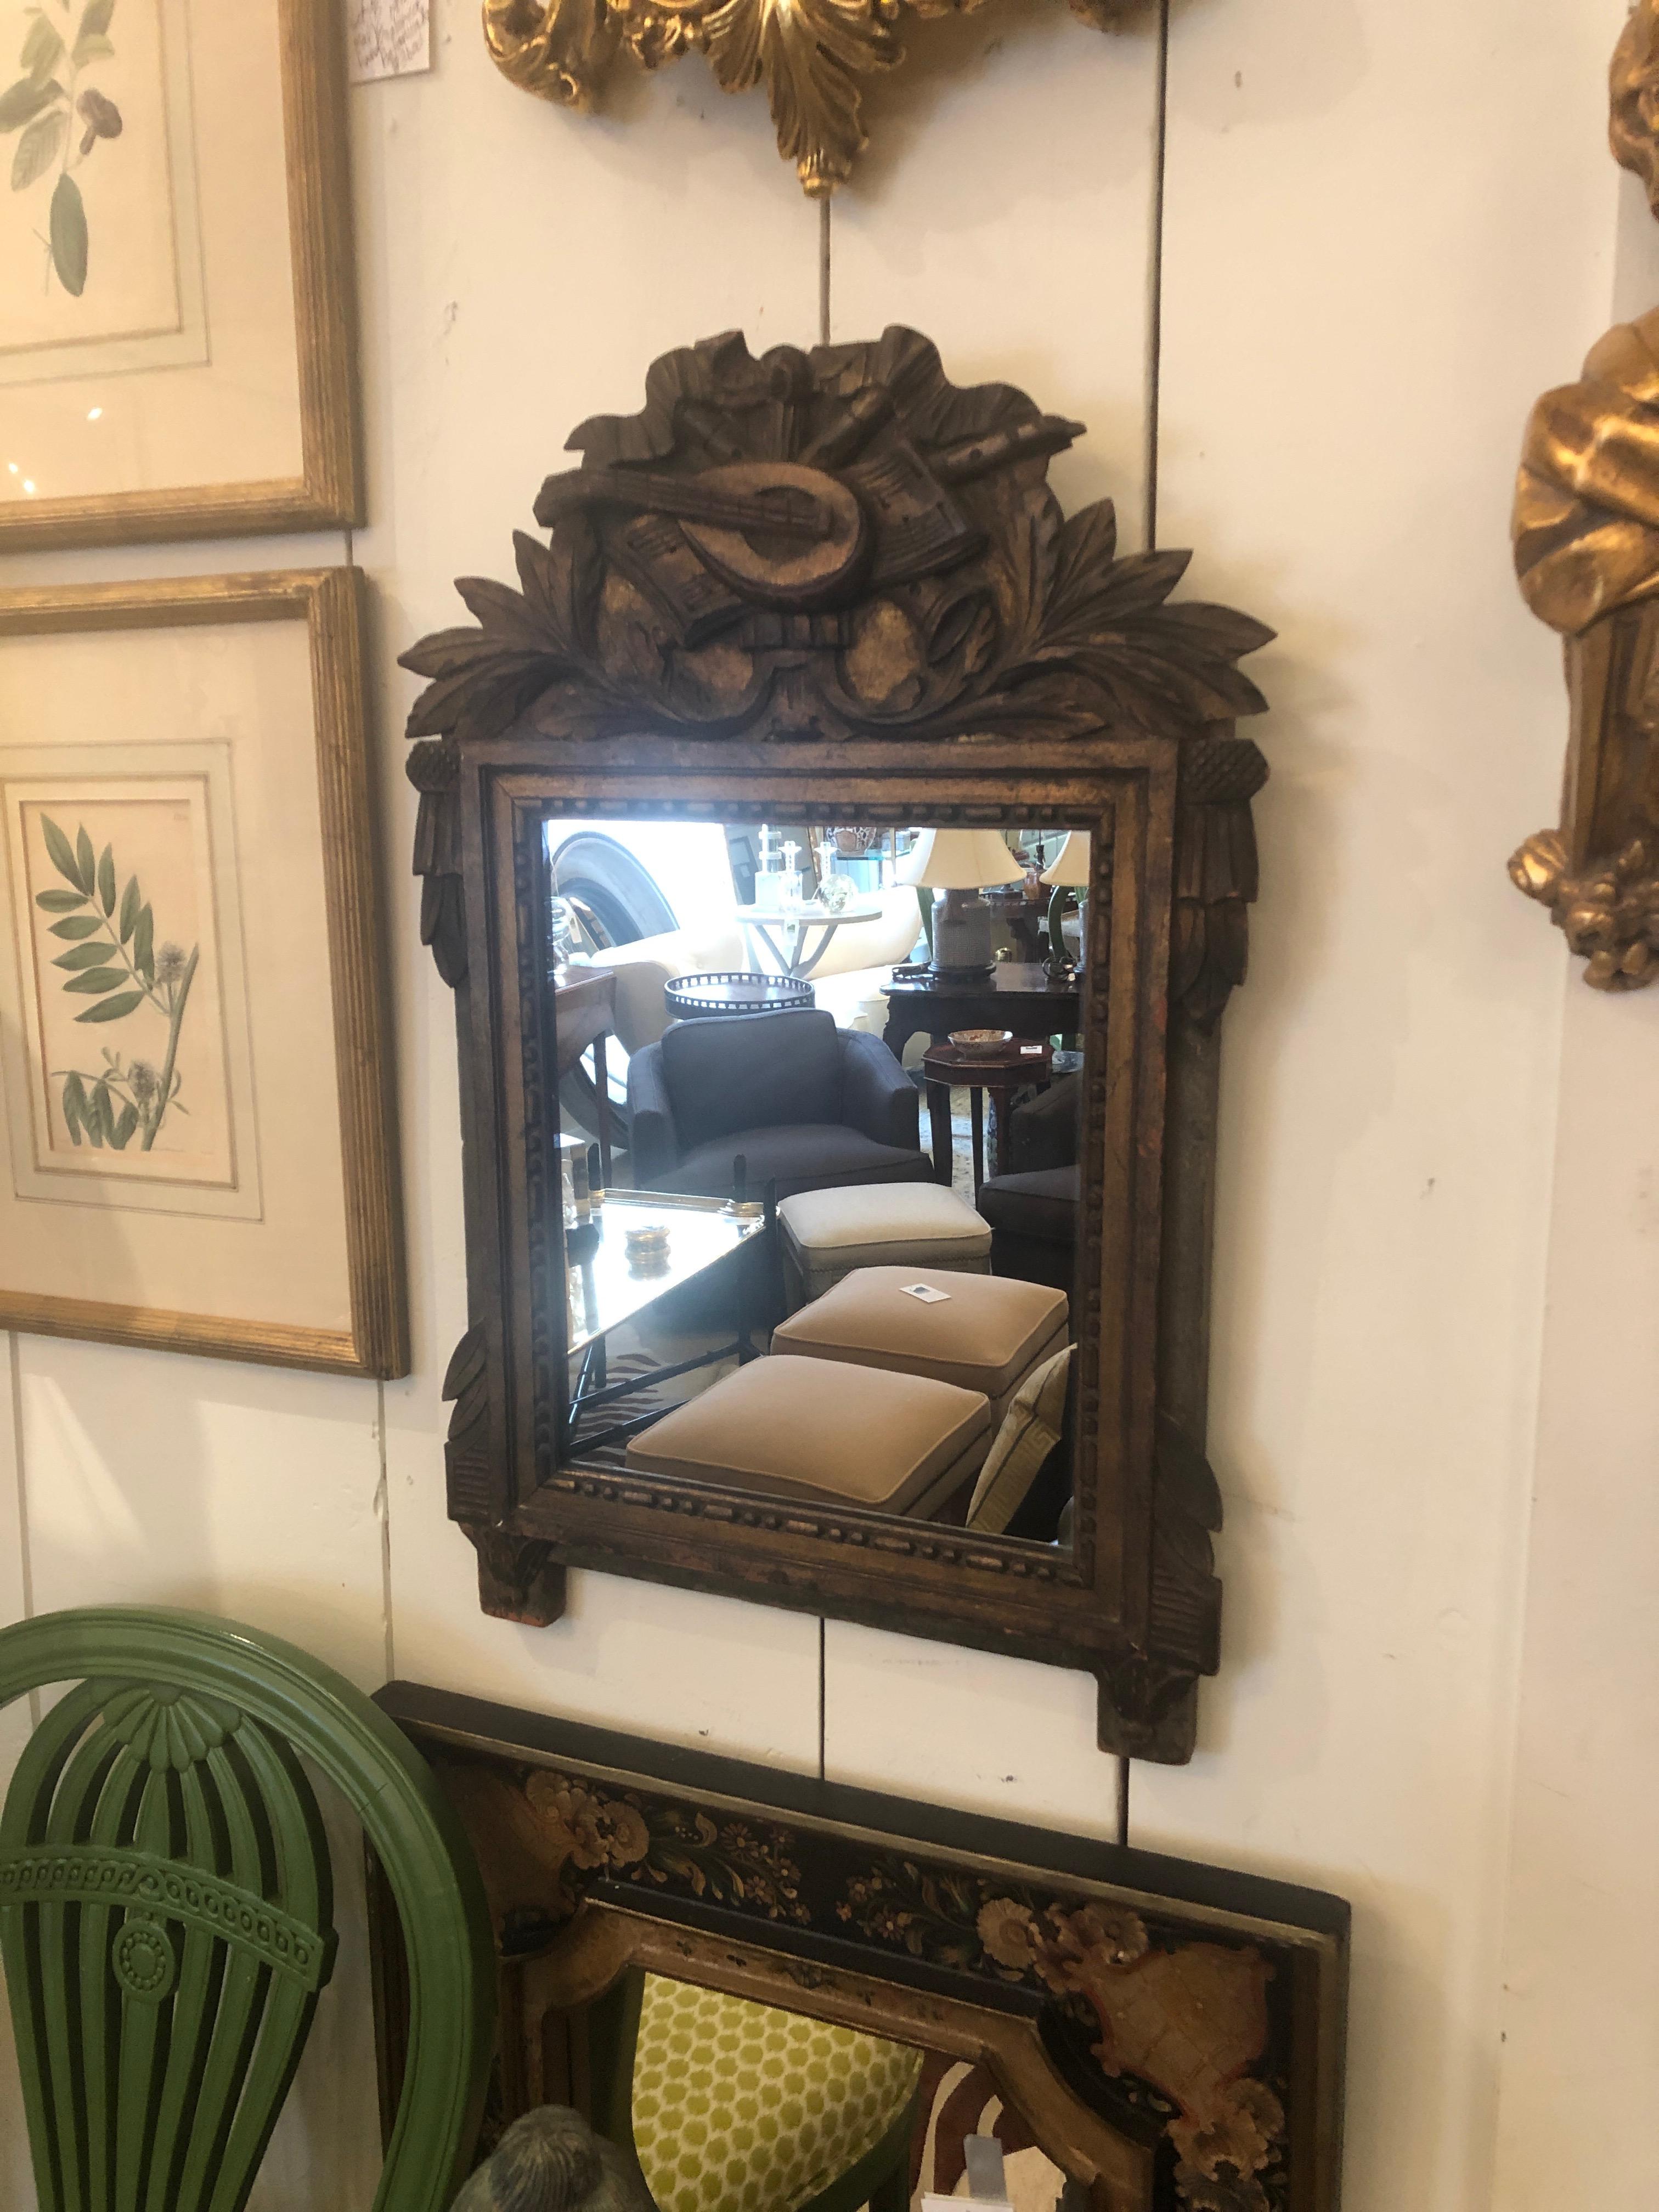 Authentic 19th century French carved giltwood small wall mirror having neoclassical design with mandolin at the top.